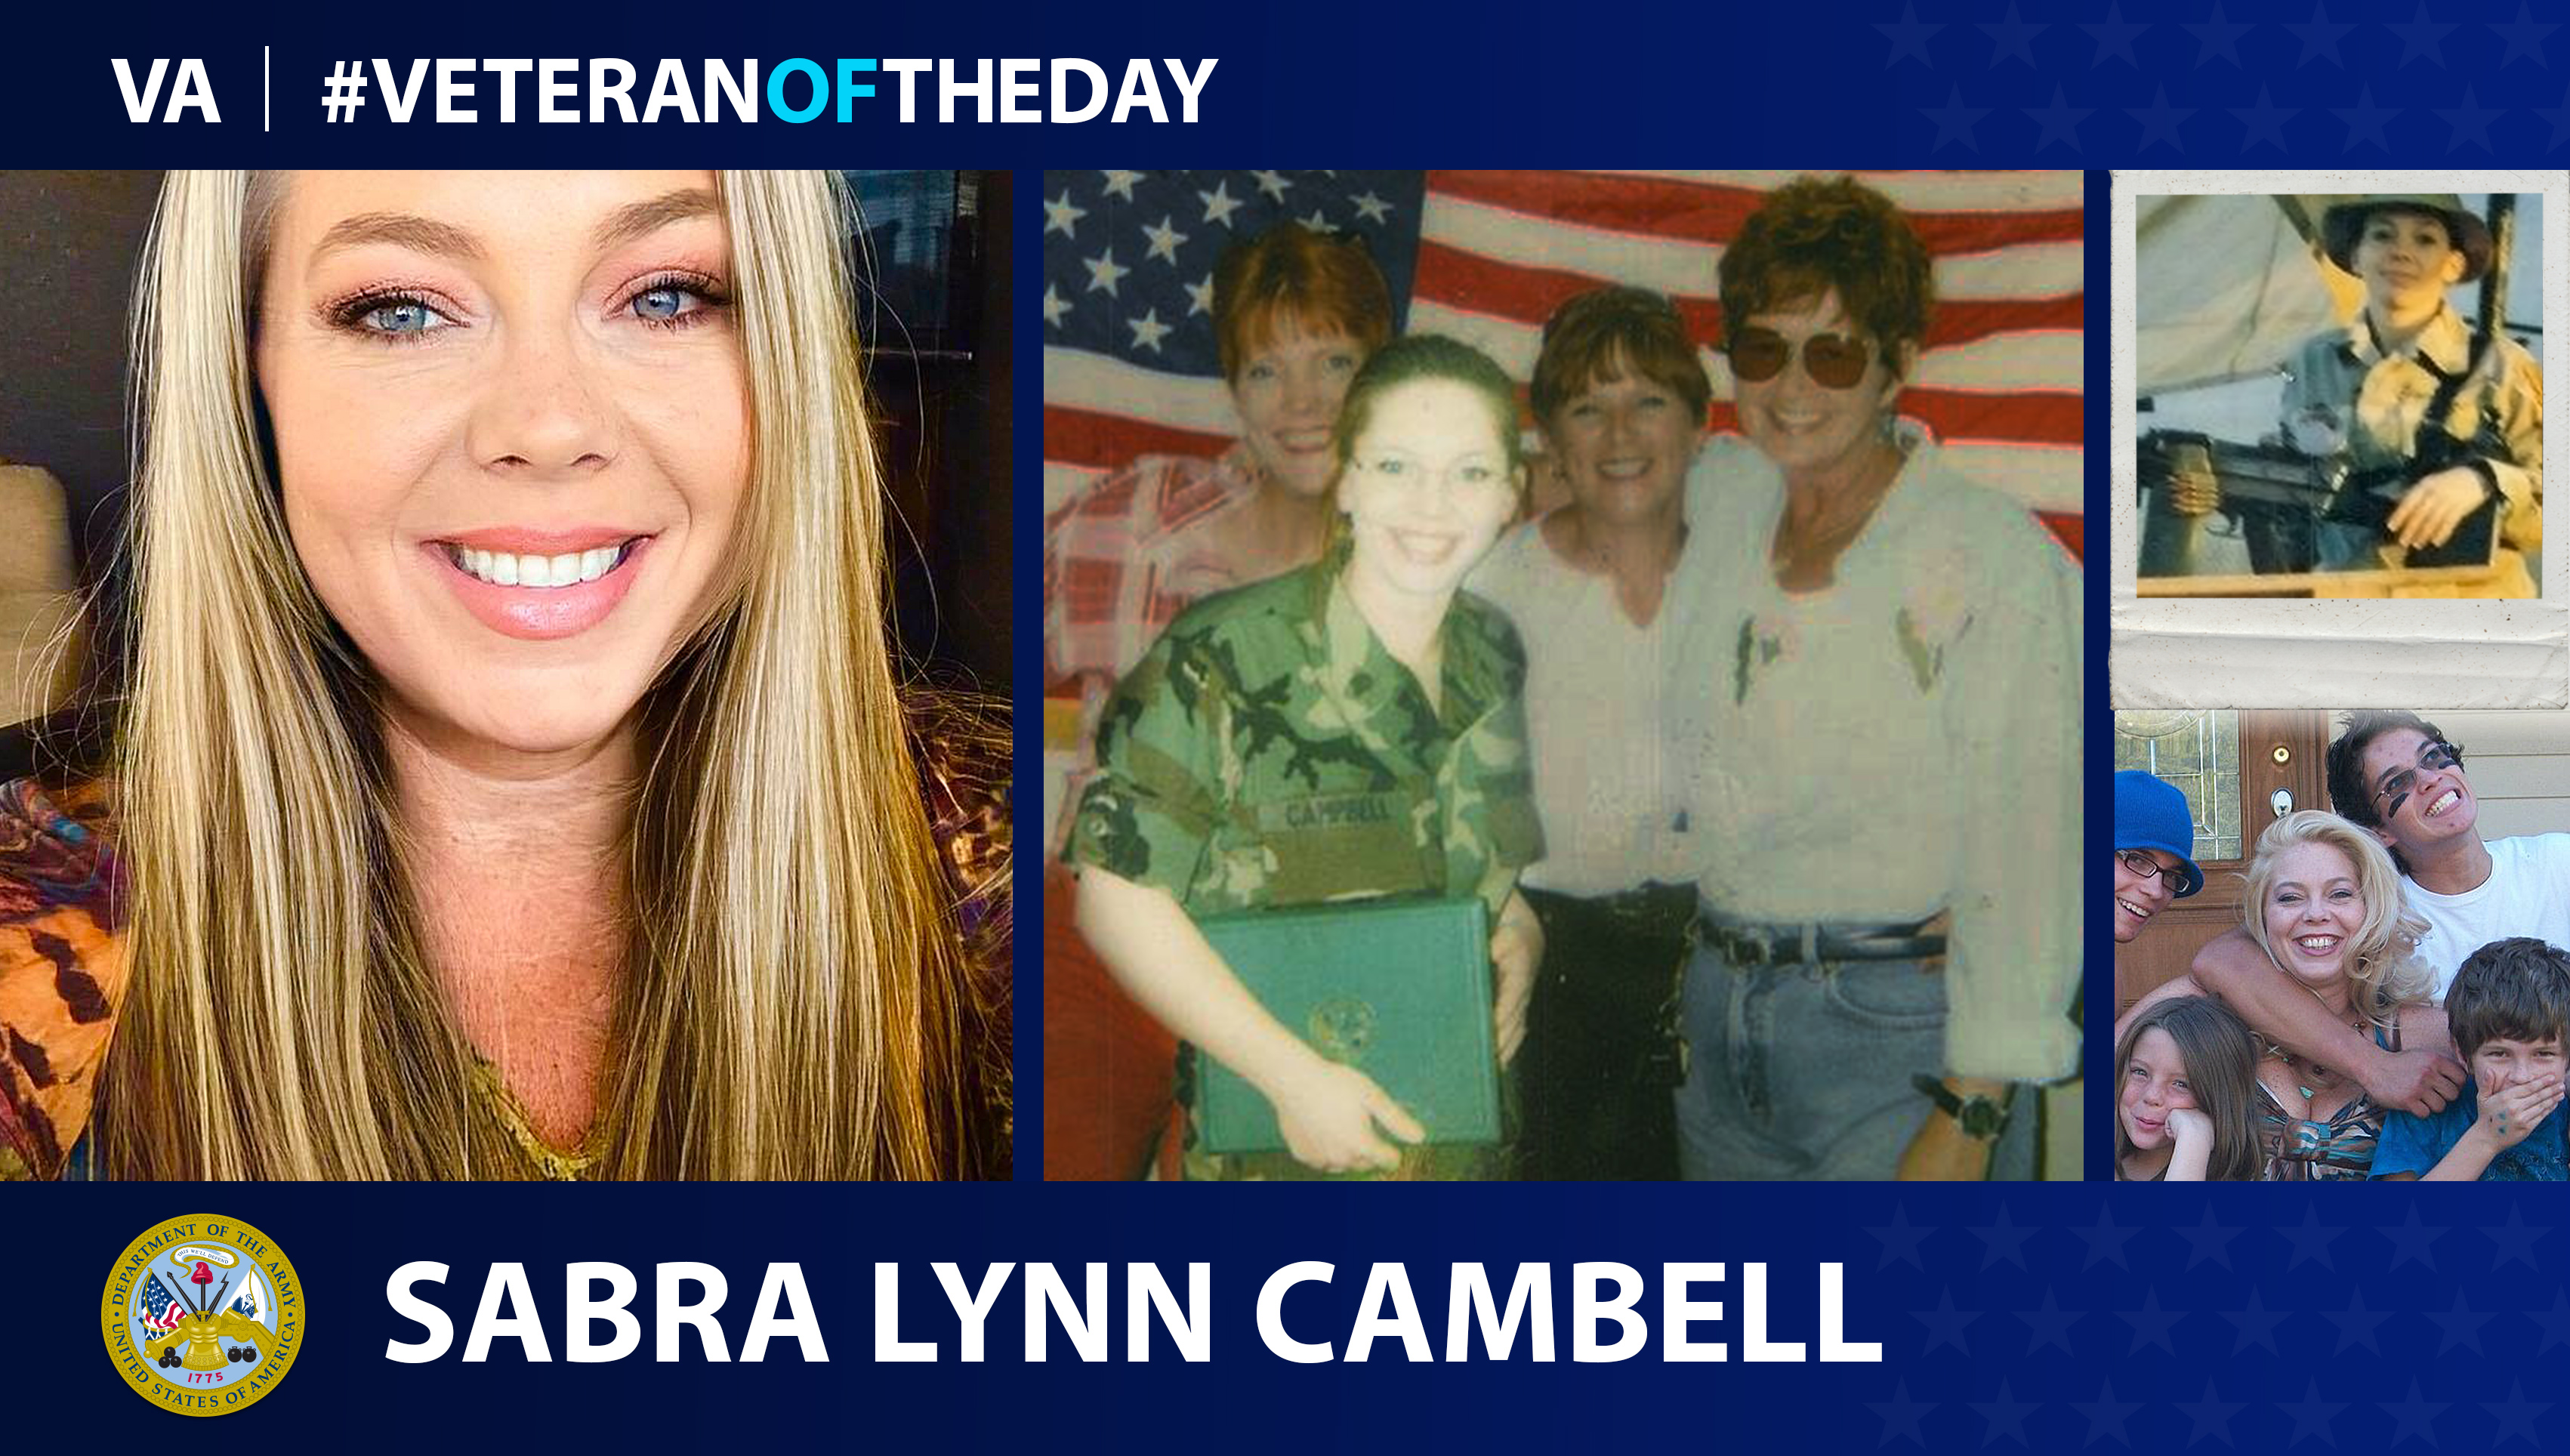 Army Veteran Sabra Lynn Campbell is today's Veteran of the Day.